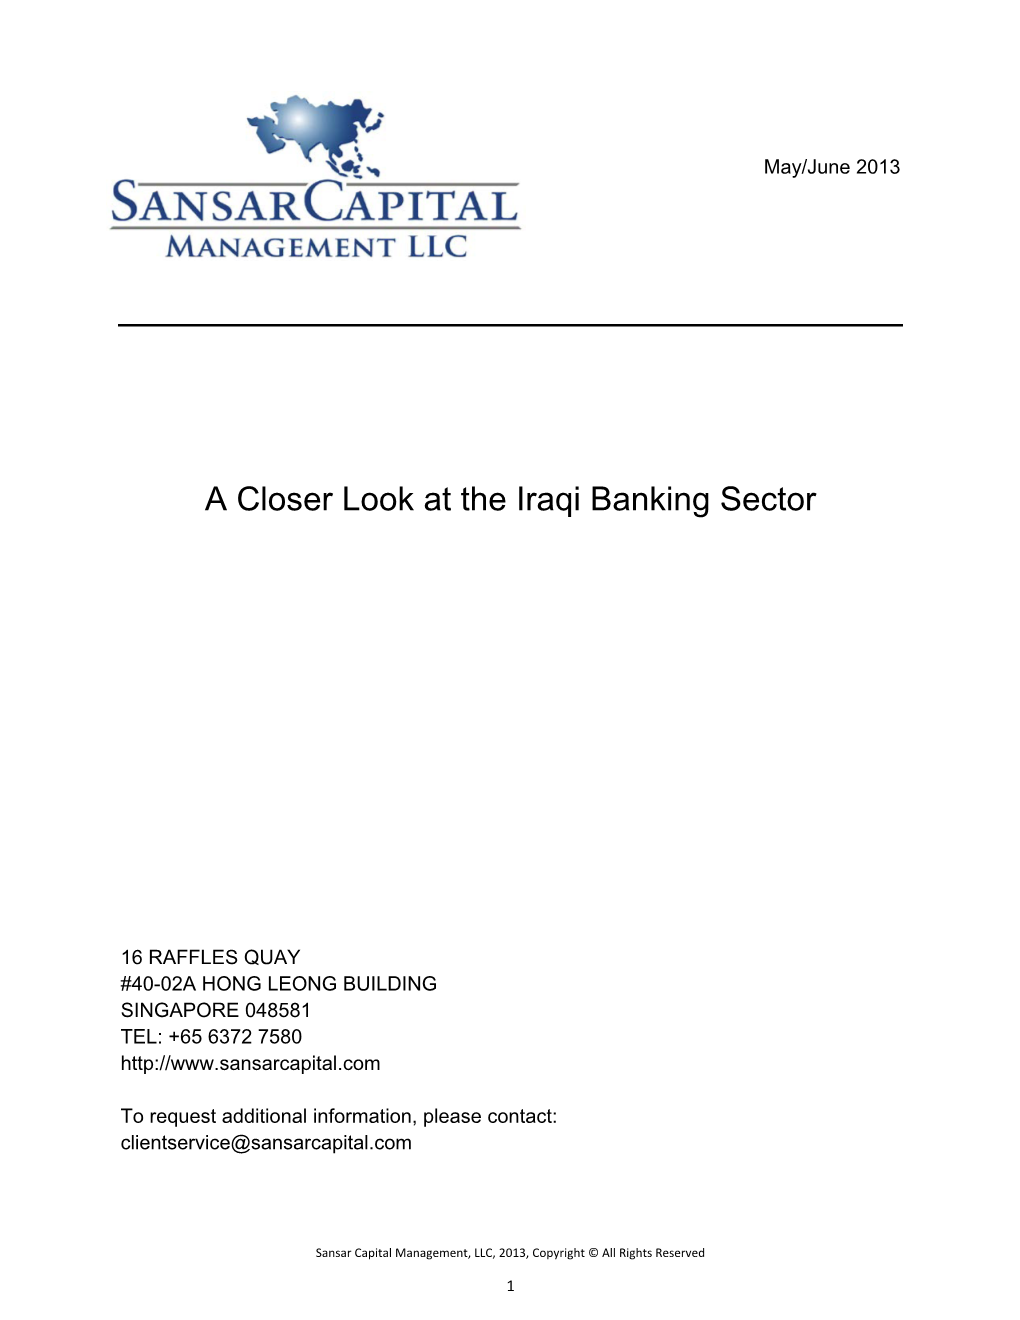 This Report, Sansar Capital Holds an Interest in Bank of Baghdad on Behalf of an Advisory Client